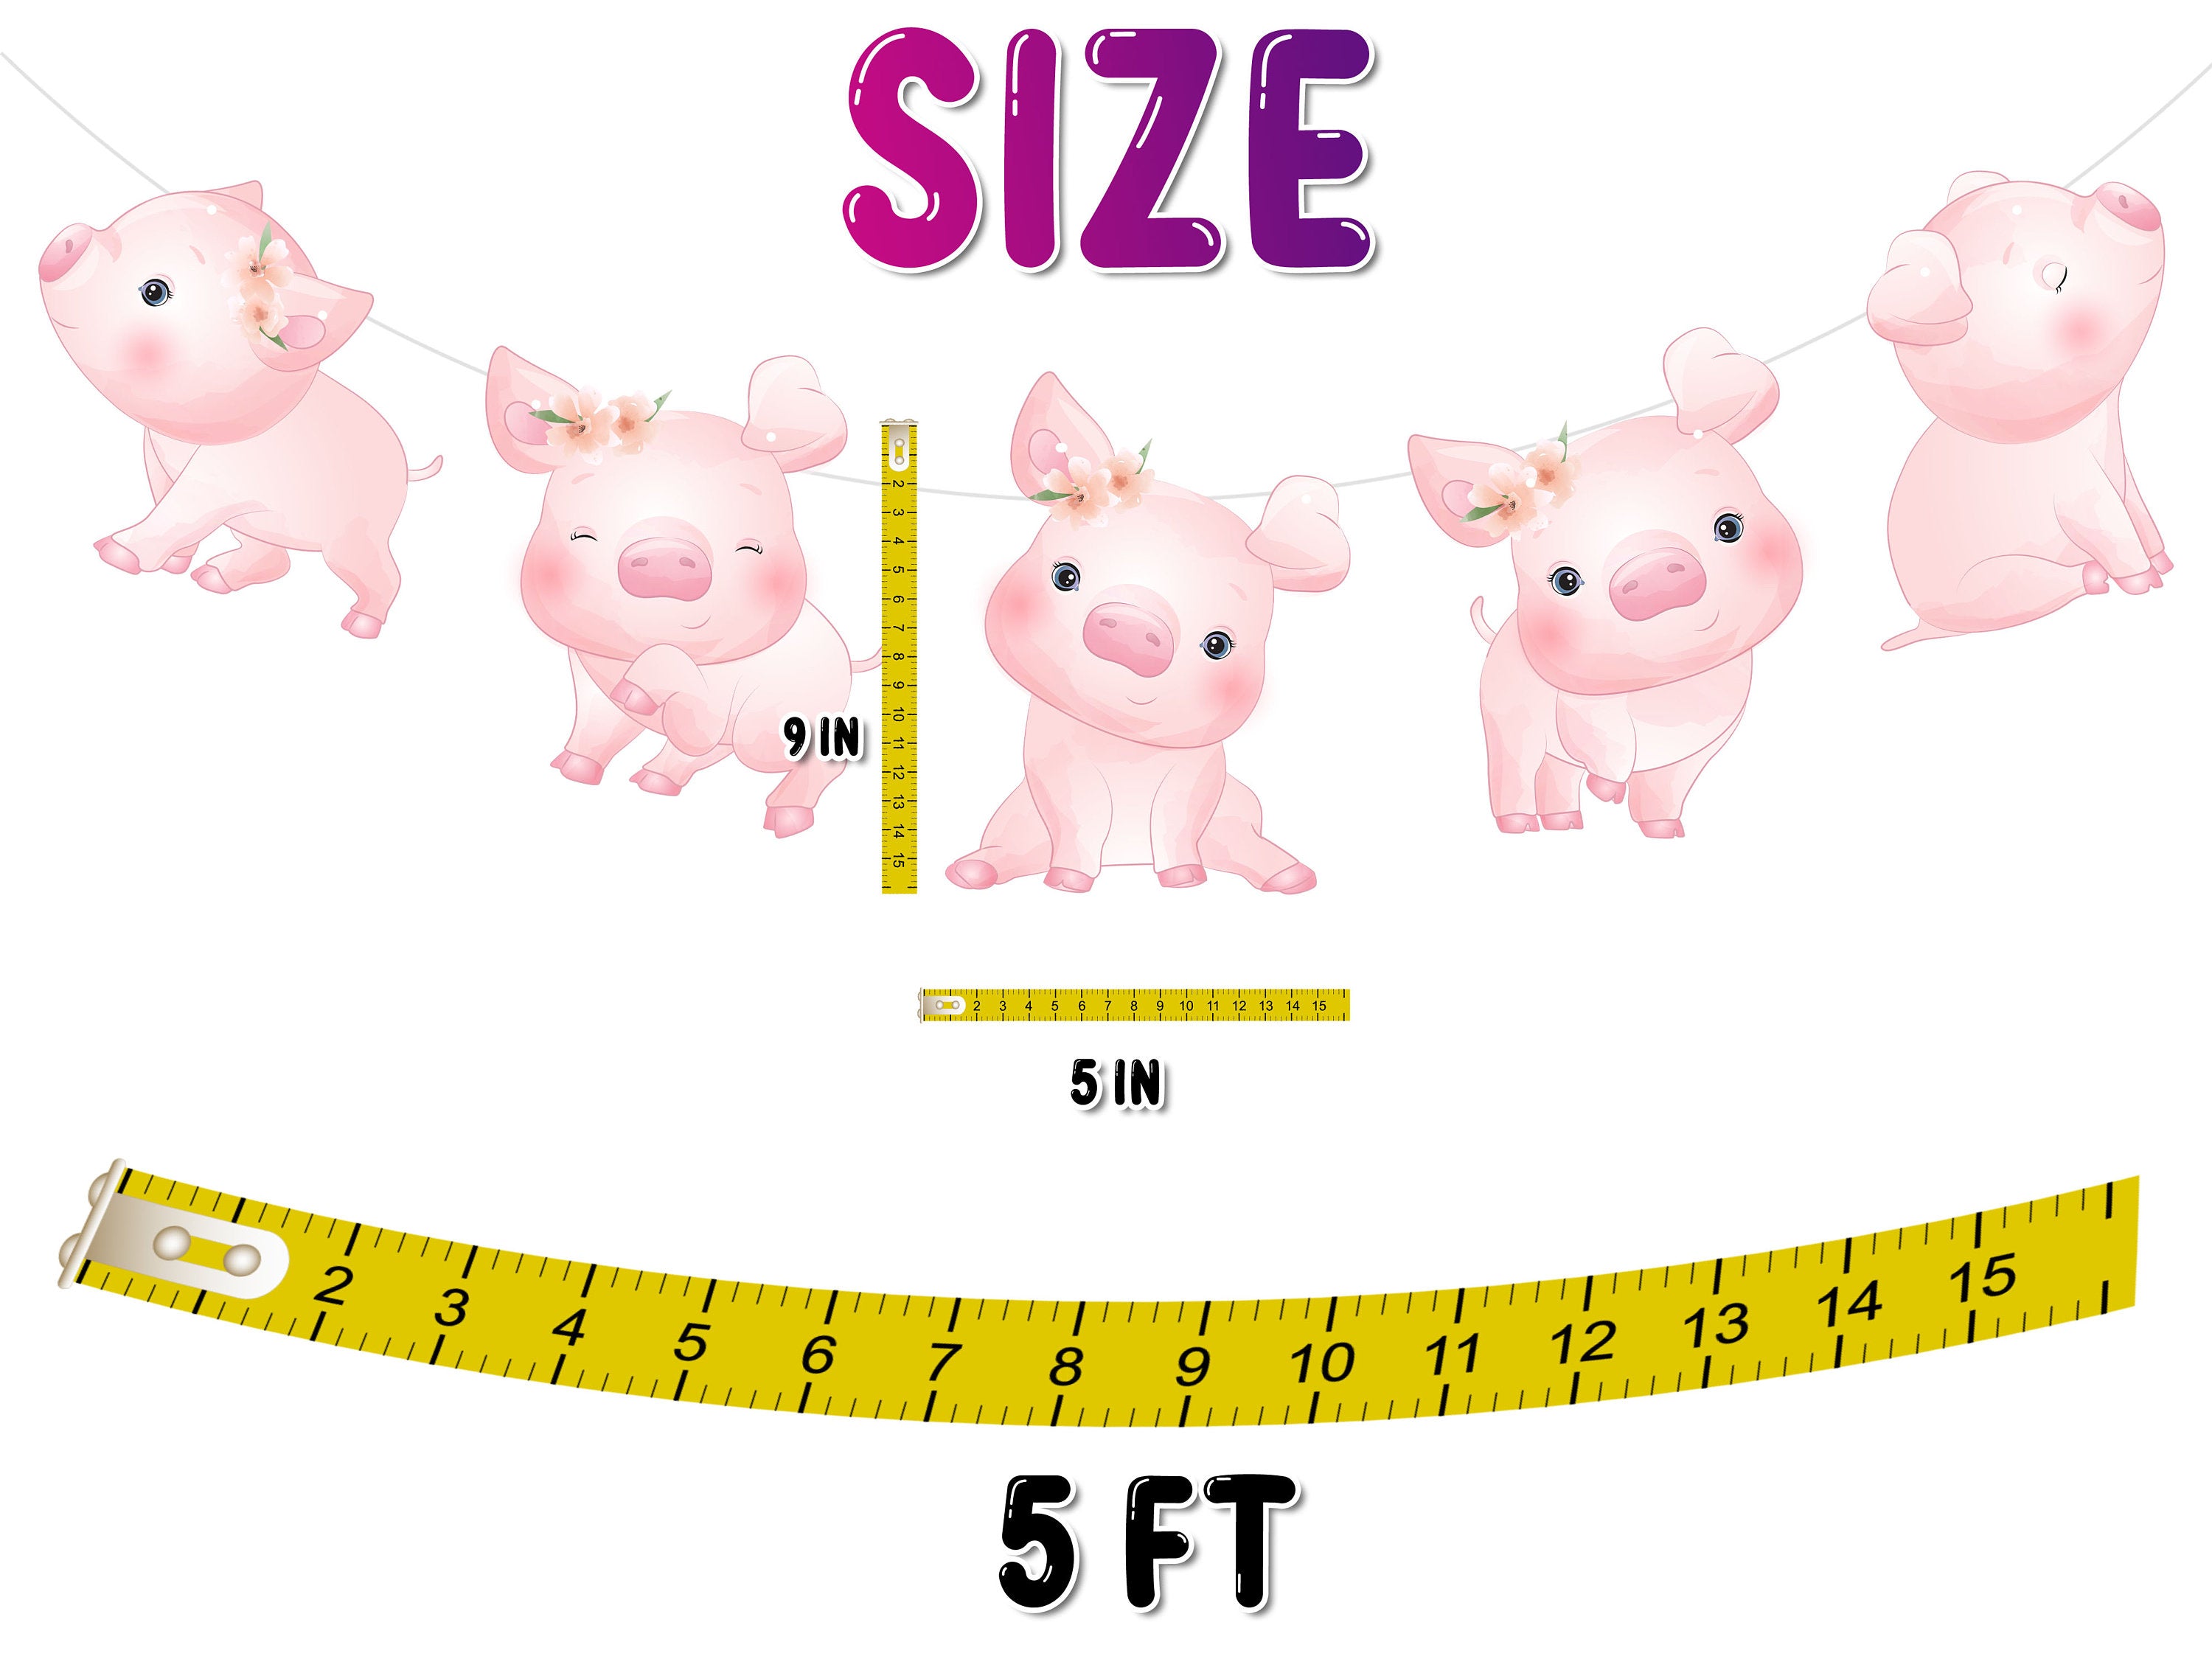 Adorable Pig Farm Cartoon Banner - Perfect for Nursery Decor and Birthday Parties